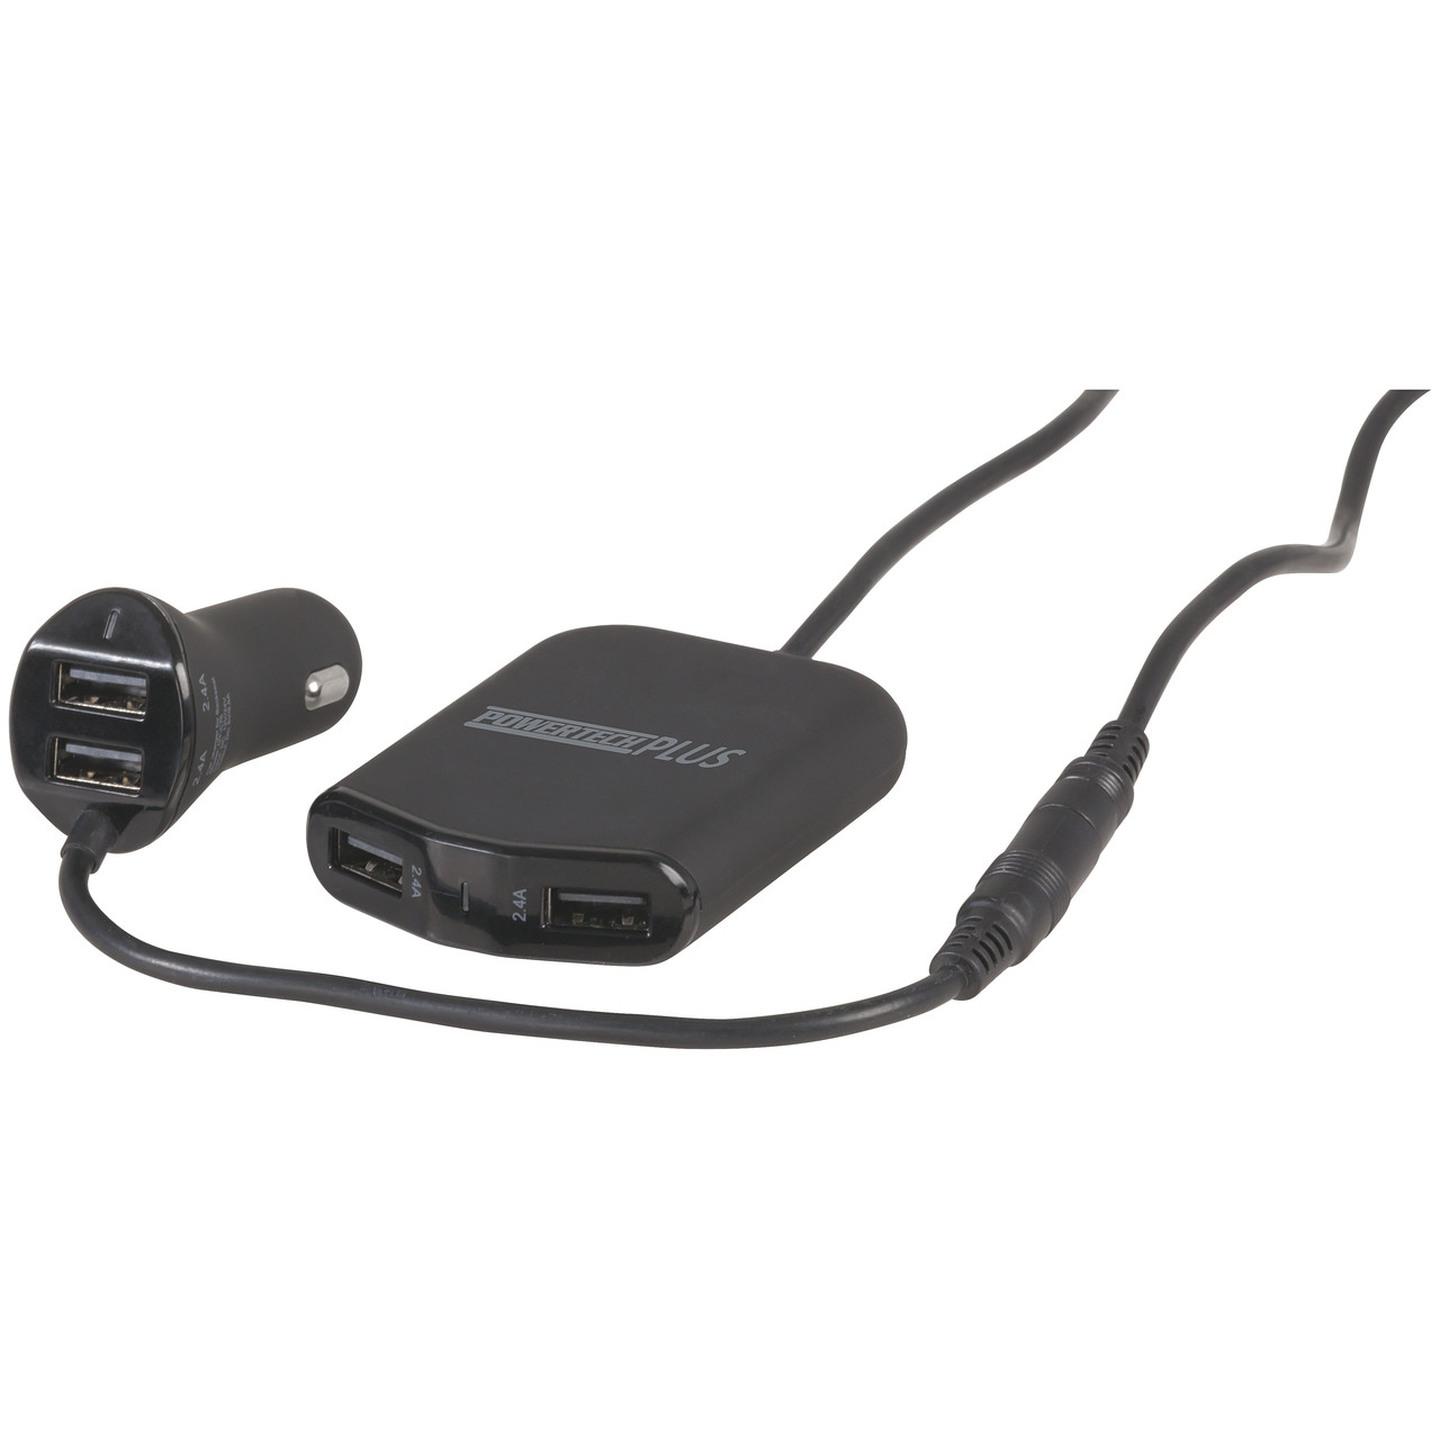 9.6A 4-Port USB Charger with Headrest Mount